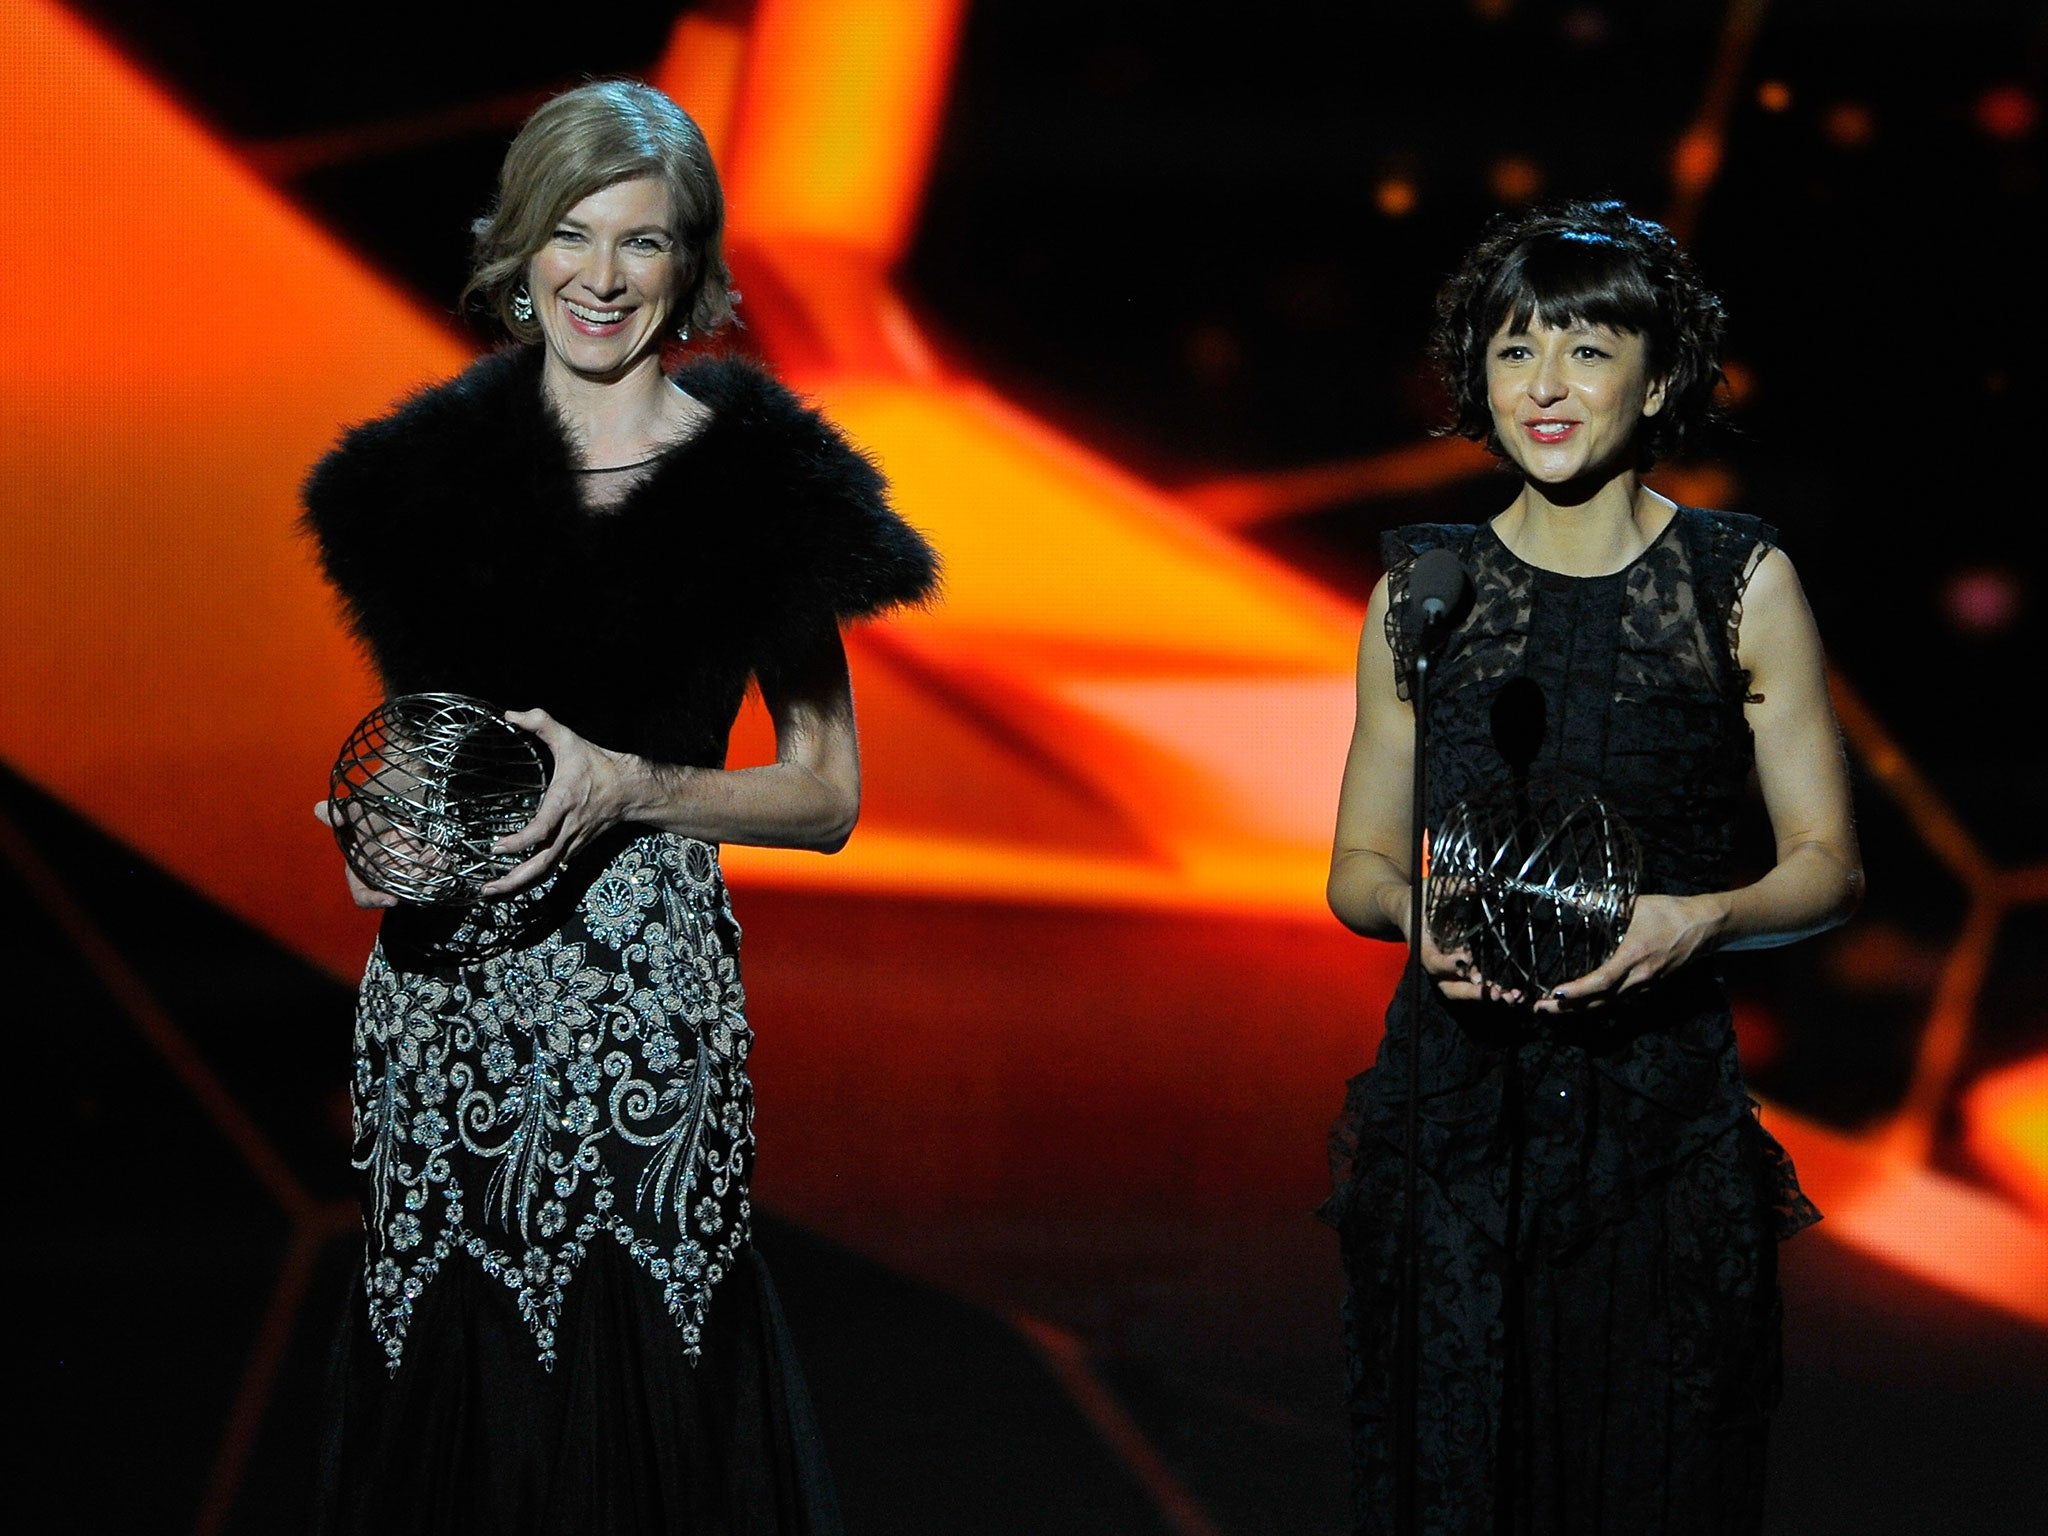 Researchers Jennifer Doudna, left, and Emmanuelle Charpentier, who described Crispr’s capabilities as ‘mind-blowing’